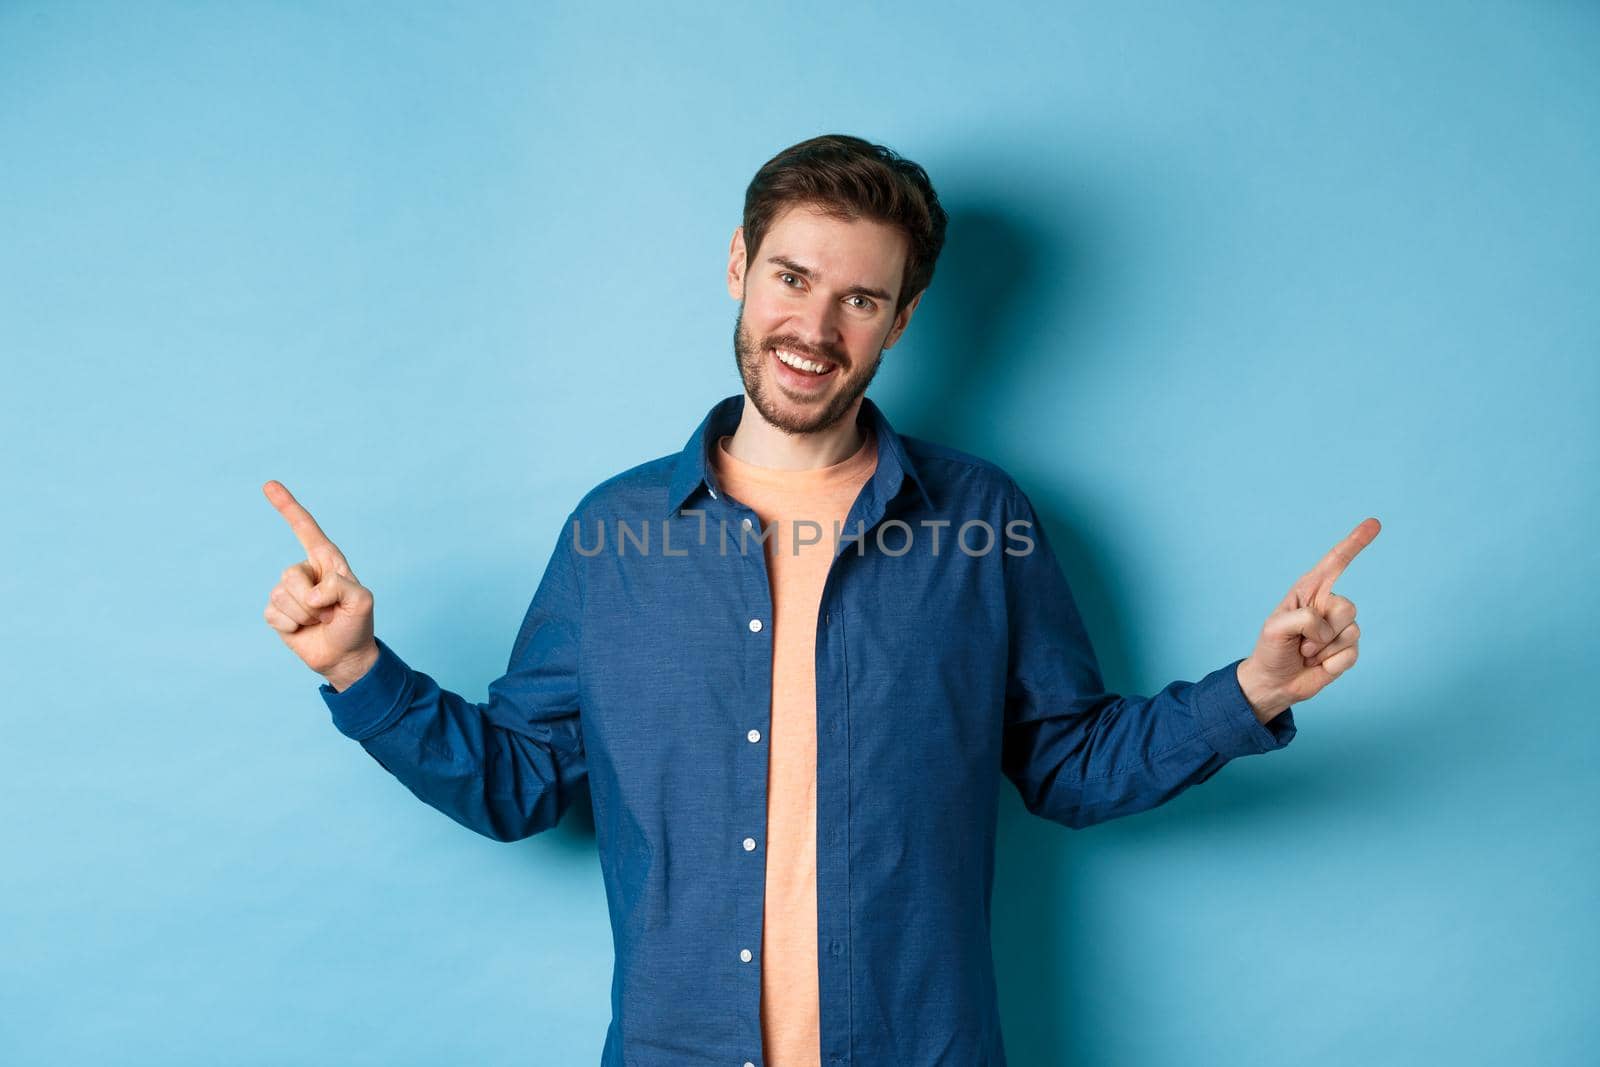 Handsome caucasian man with beard, smiling with white teeth and pointing fingers sideways, showing two choices, standing on blue background.